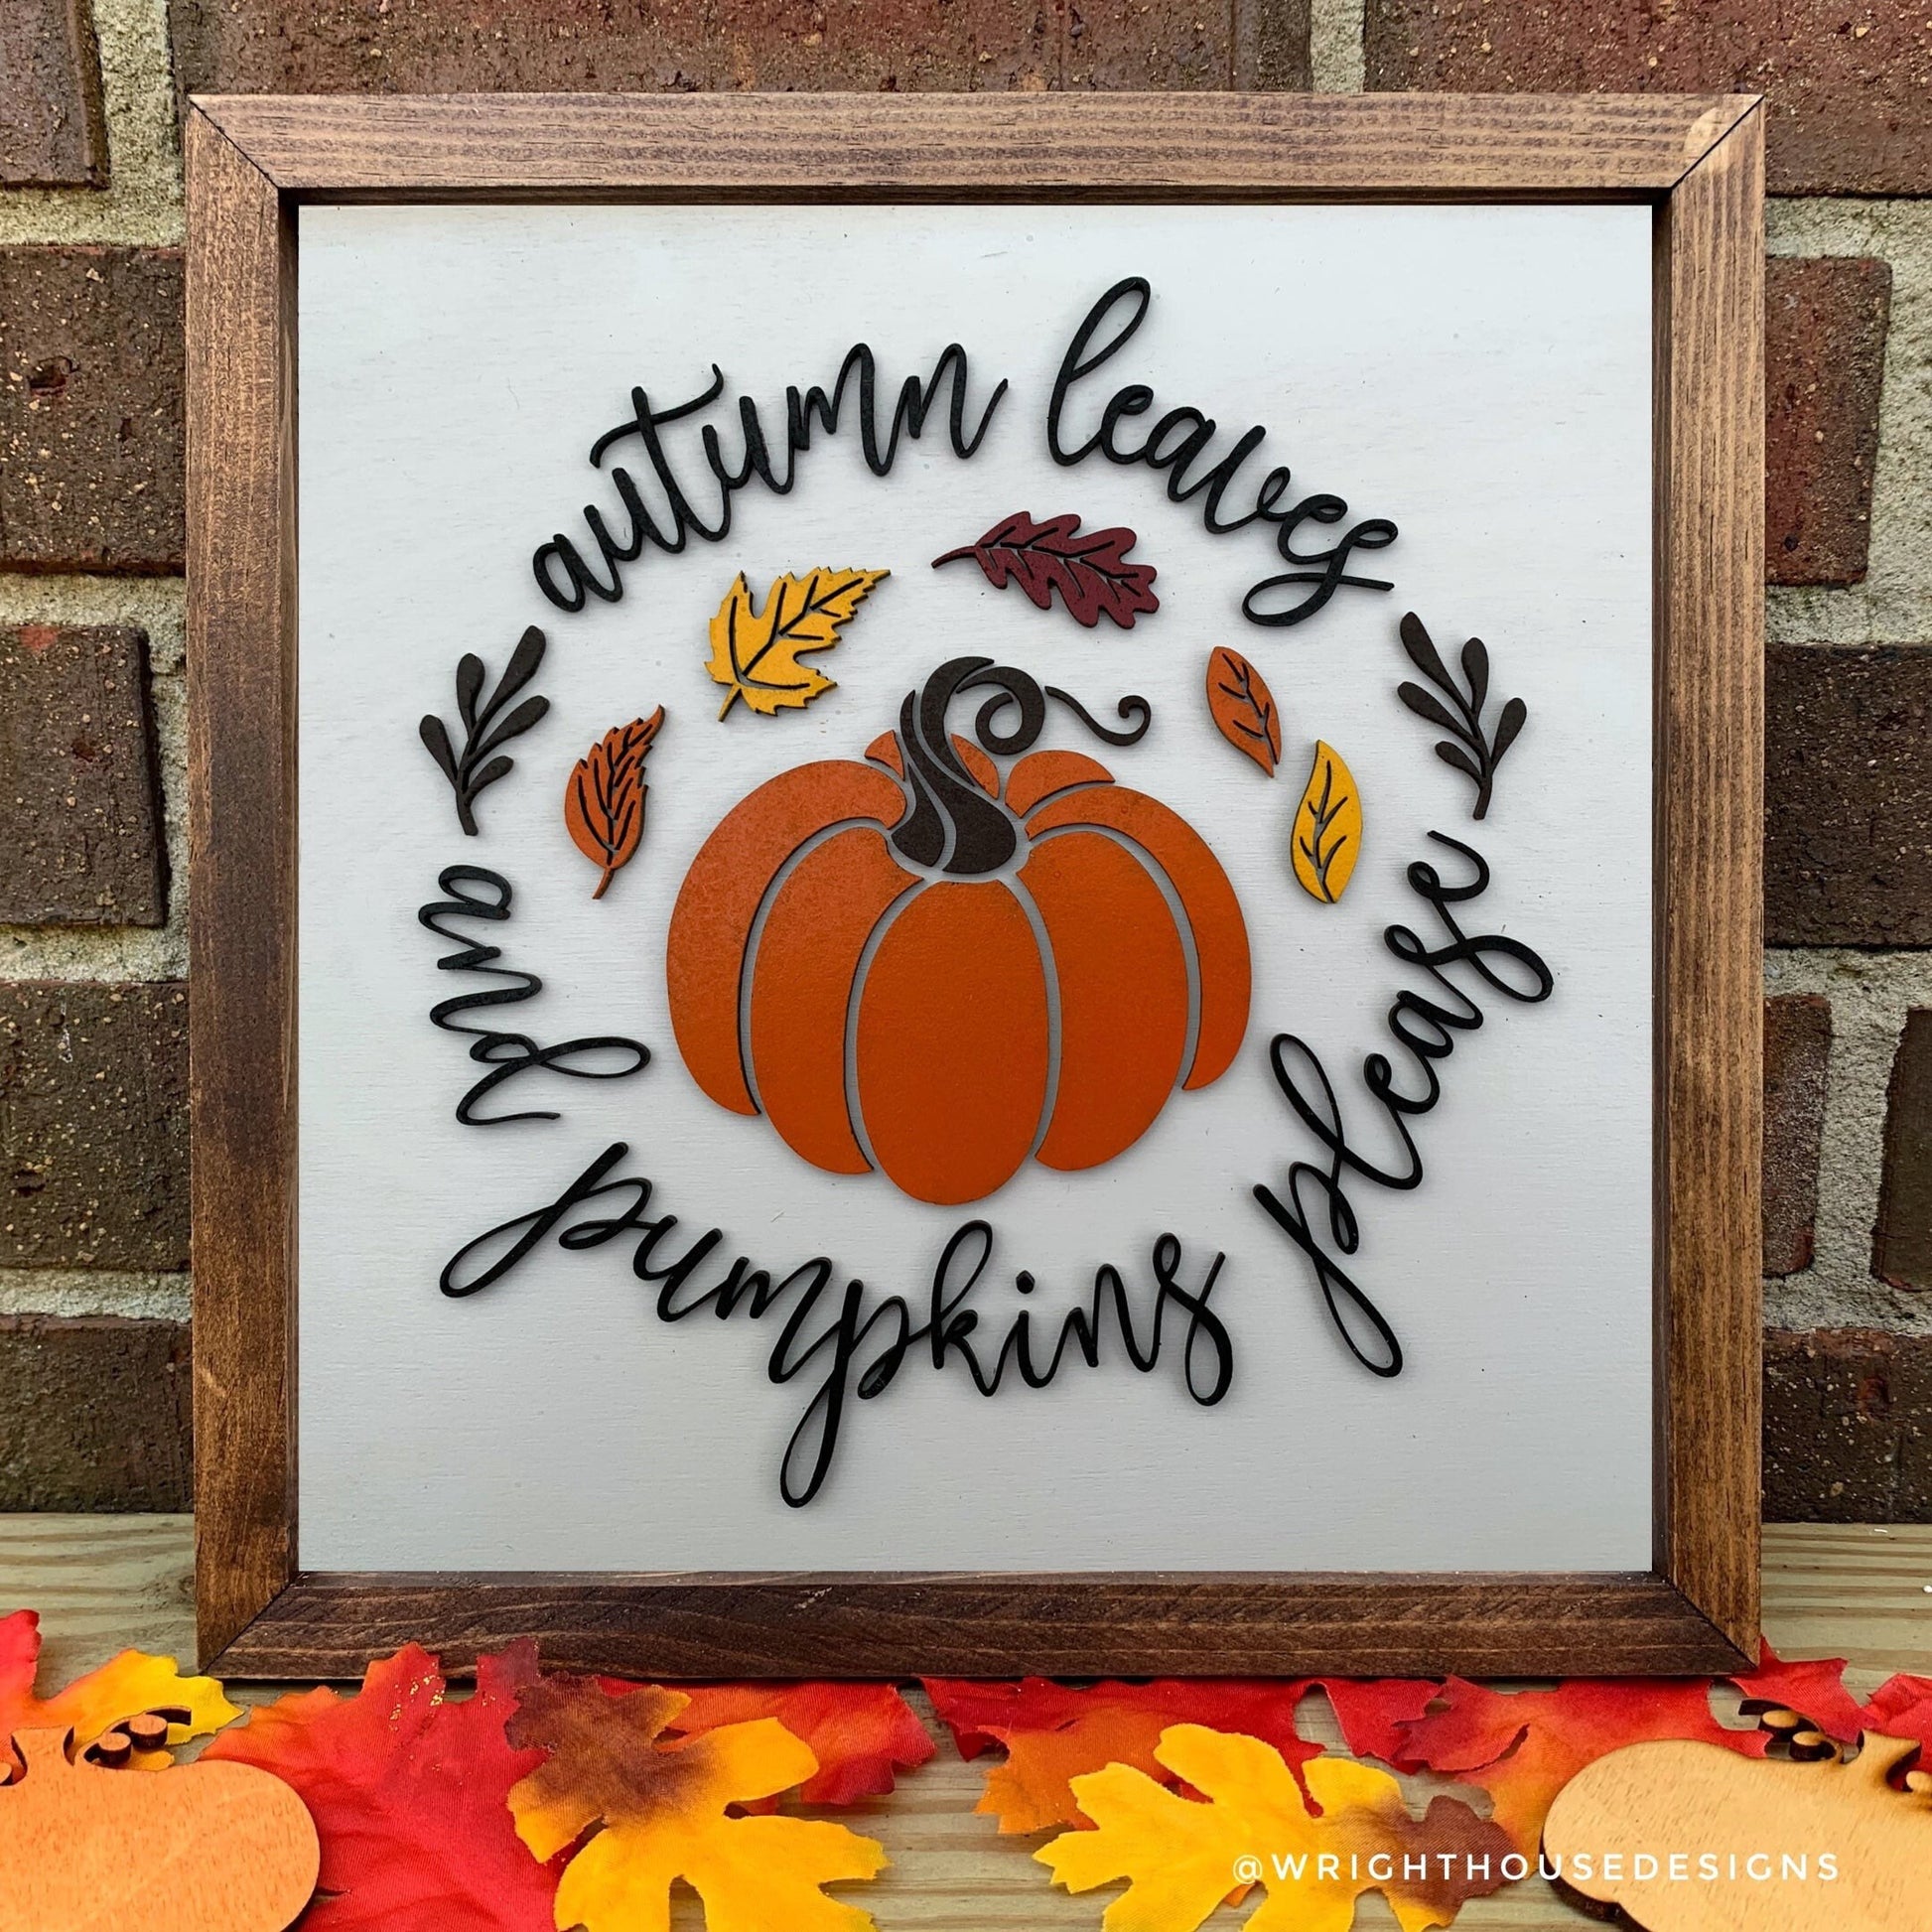 Autumn Leaves and Pumpkins Please - Wooden Coffee Bar Sign - Cottagecore Home and Kitchen Decor - Console Table Decor - Seasonal Wall Art